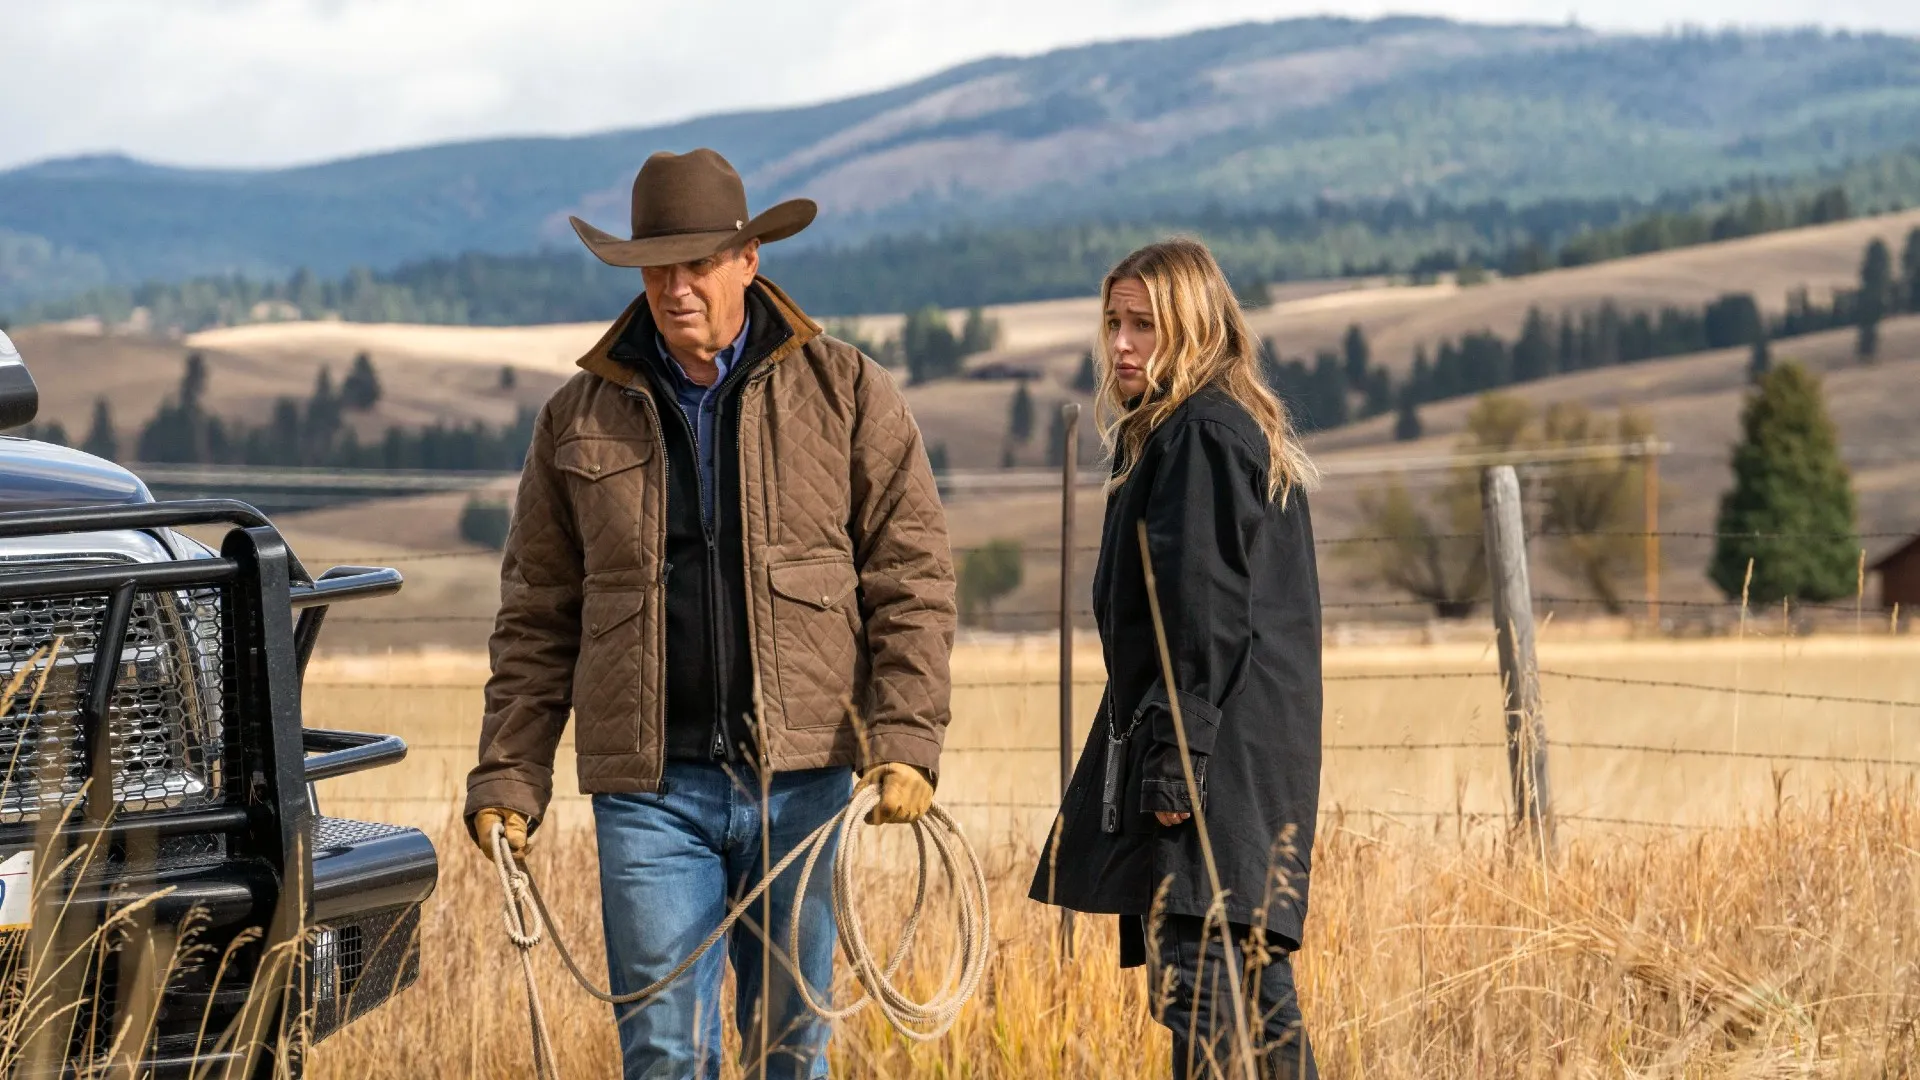 Yellowstone Season 5 Part 2: The Wait, The Expectations, and The Unfolding Drama